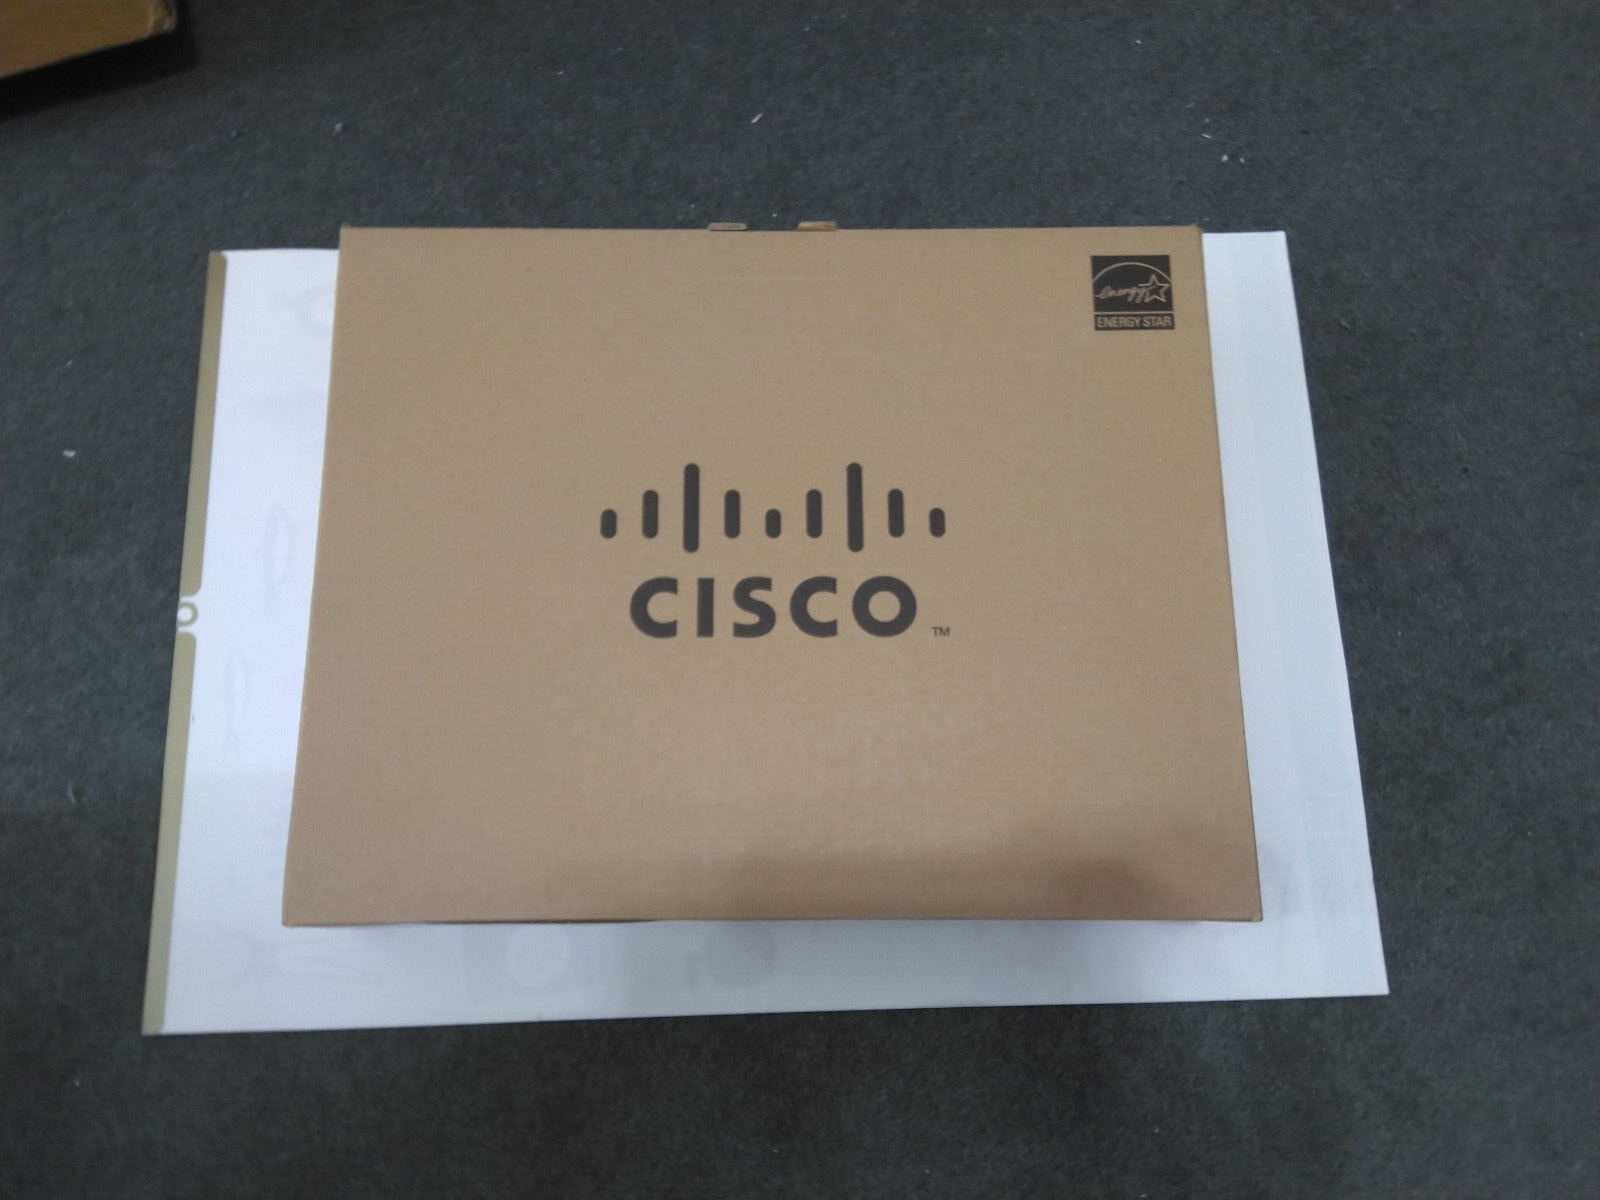 New in box Cisco CP-8811 Business VOIP UC IP Phone CP-8811-K9=